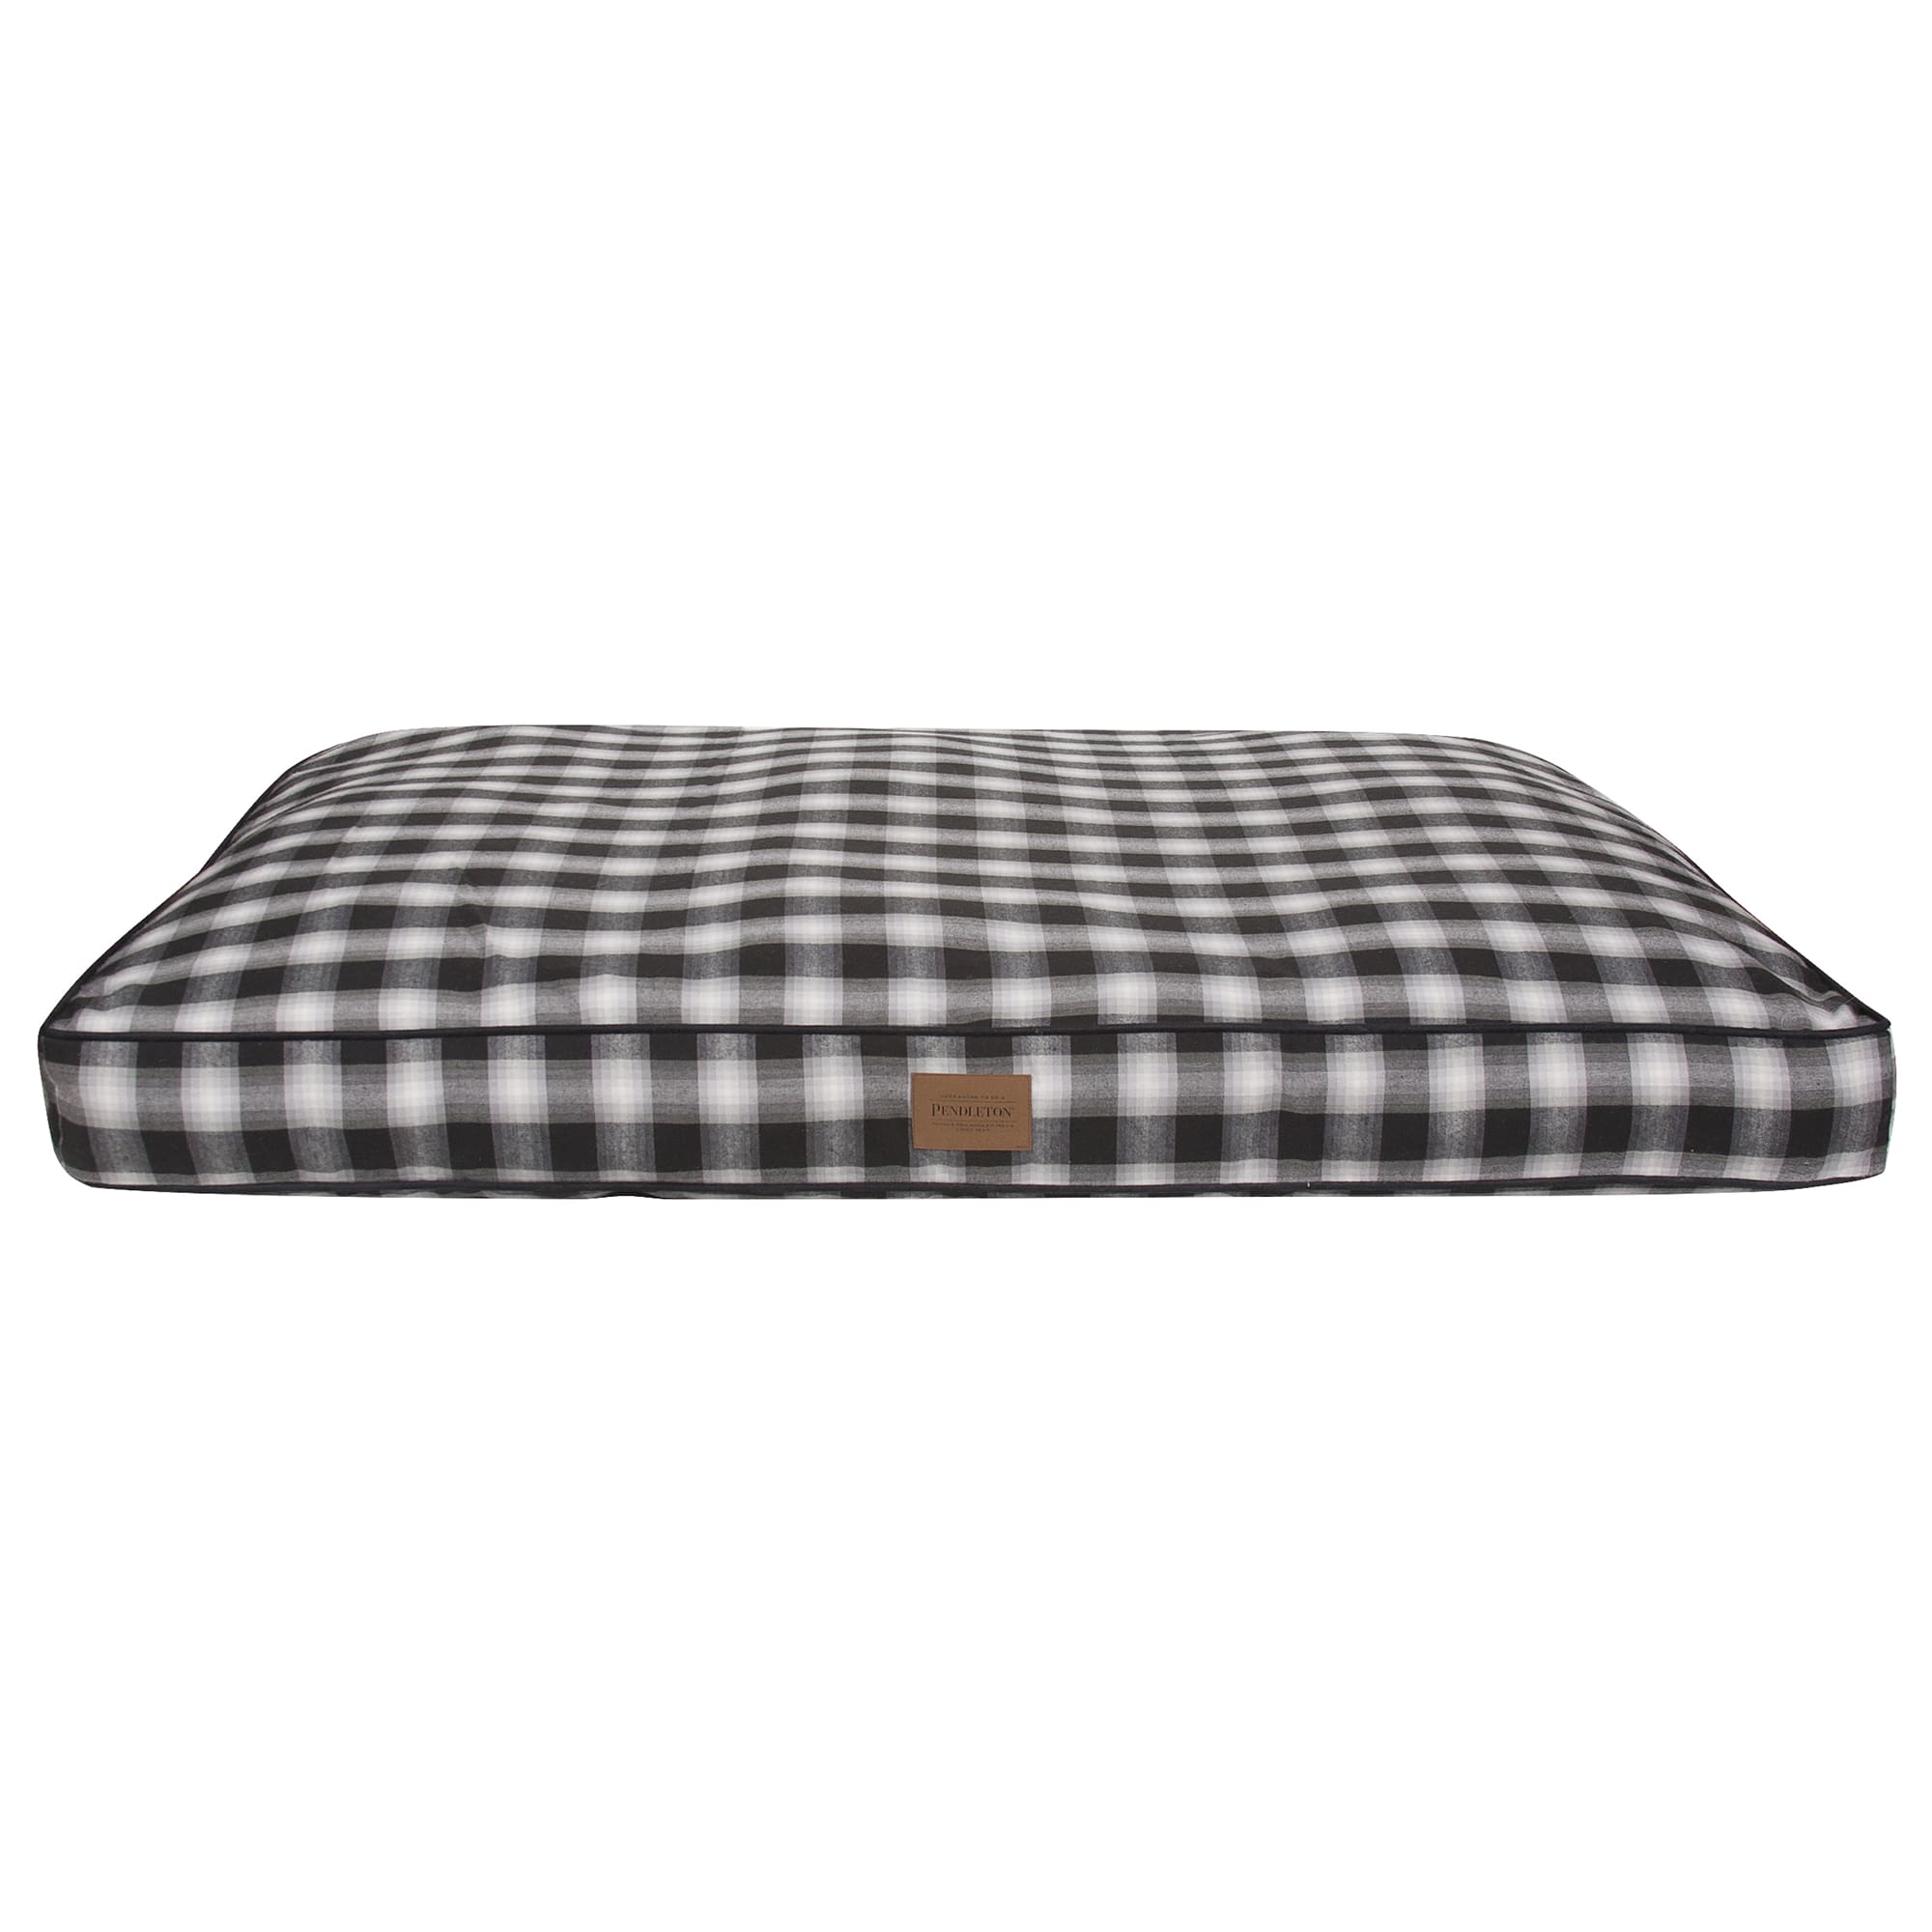 Pendleton Plaid Pet Bed in Charcoal 